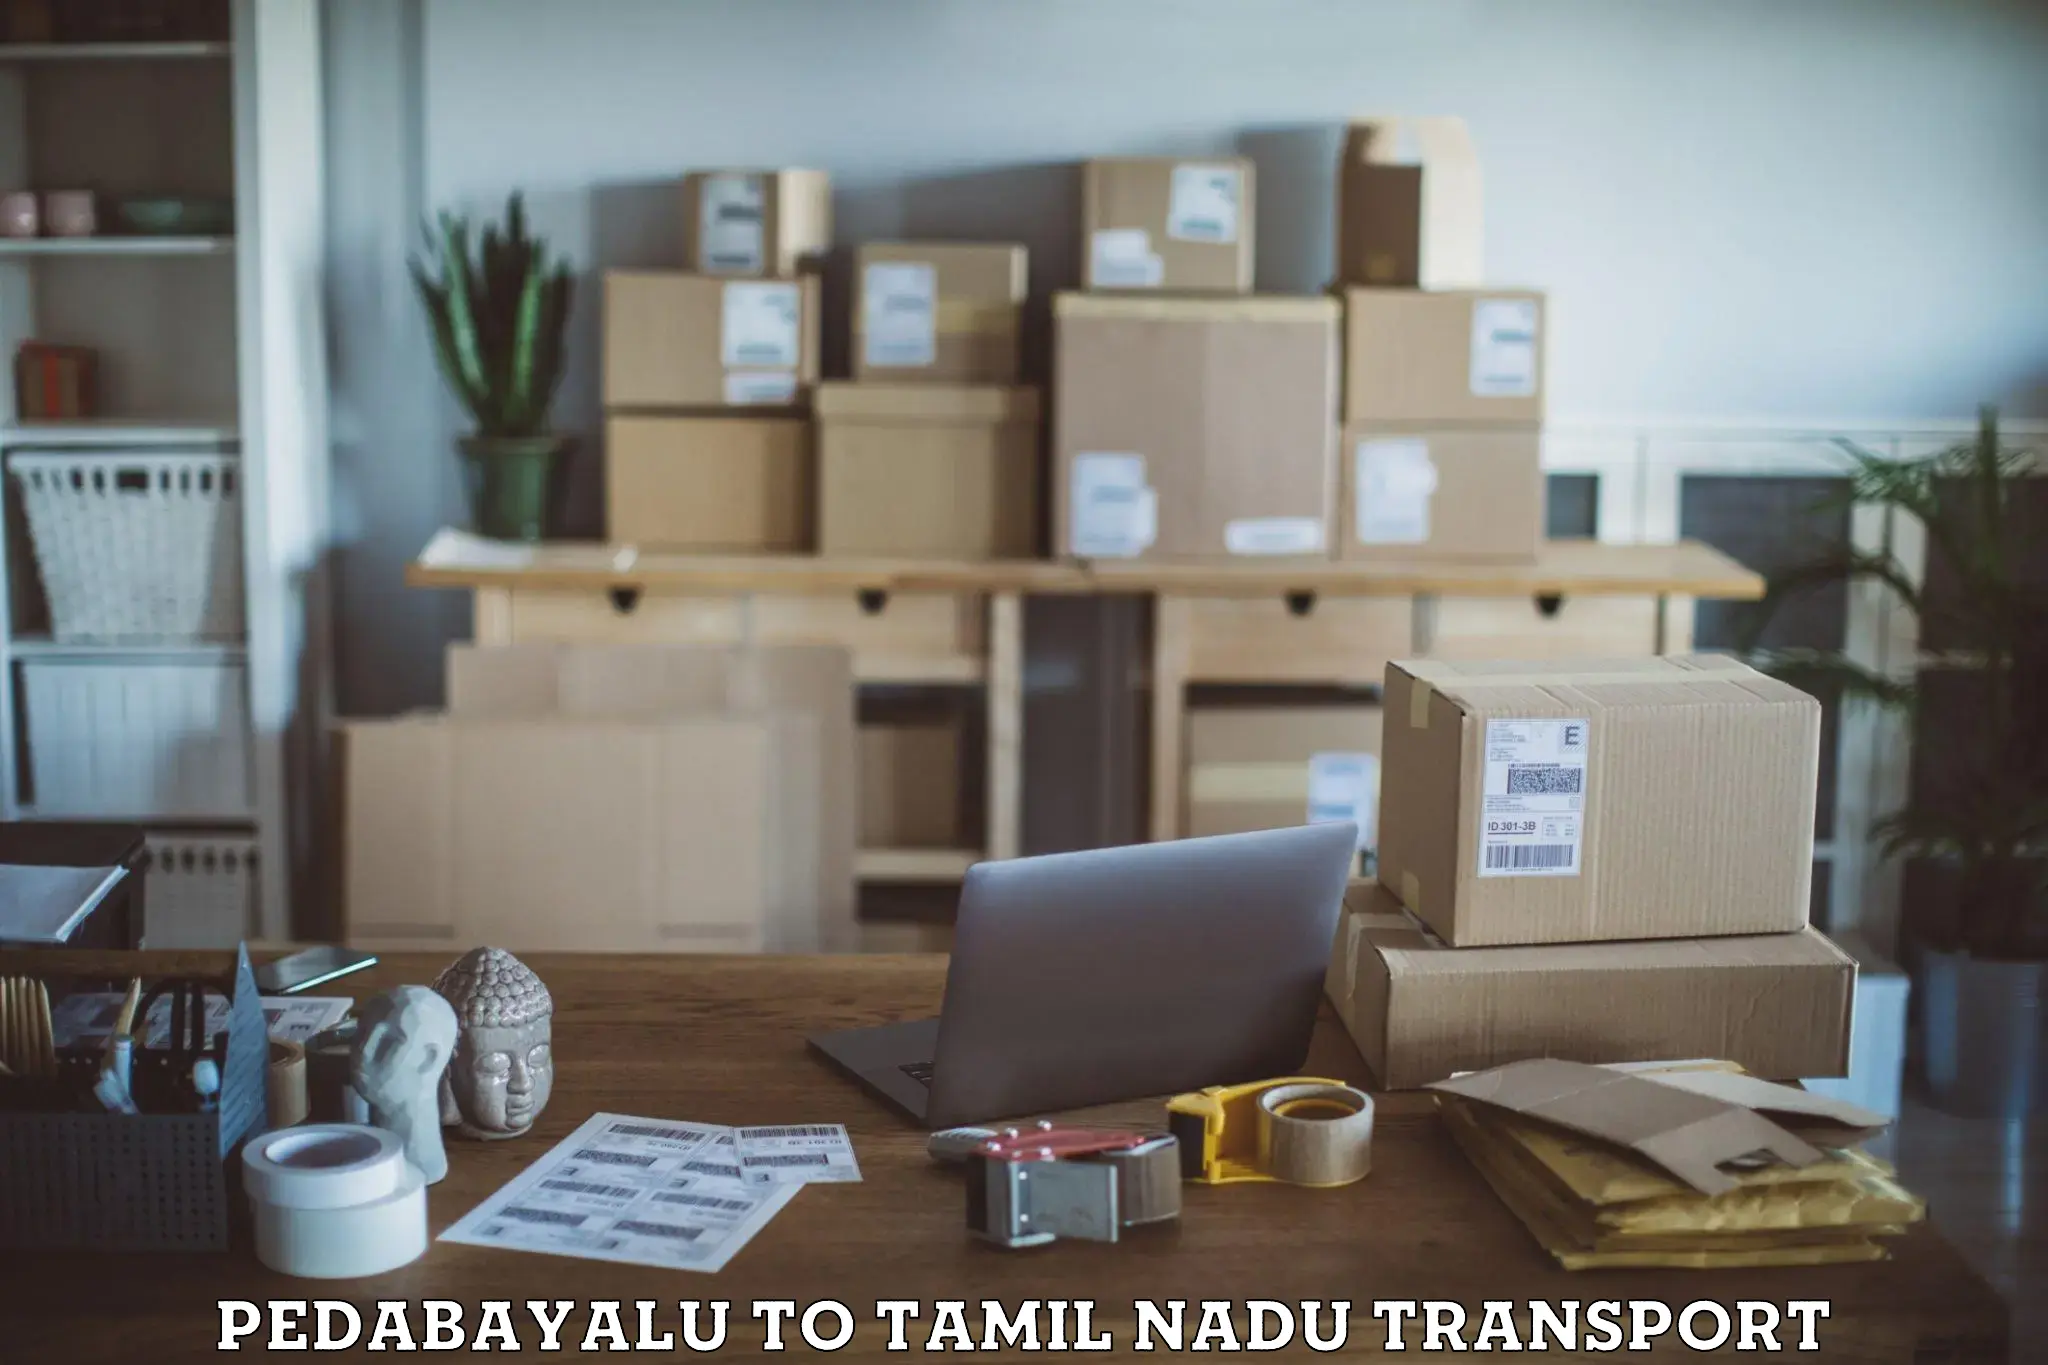 Air freight transport services in Pedabayalu to Coimbatore